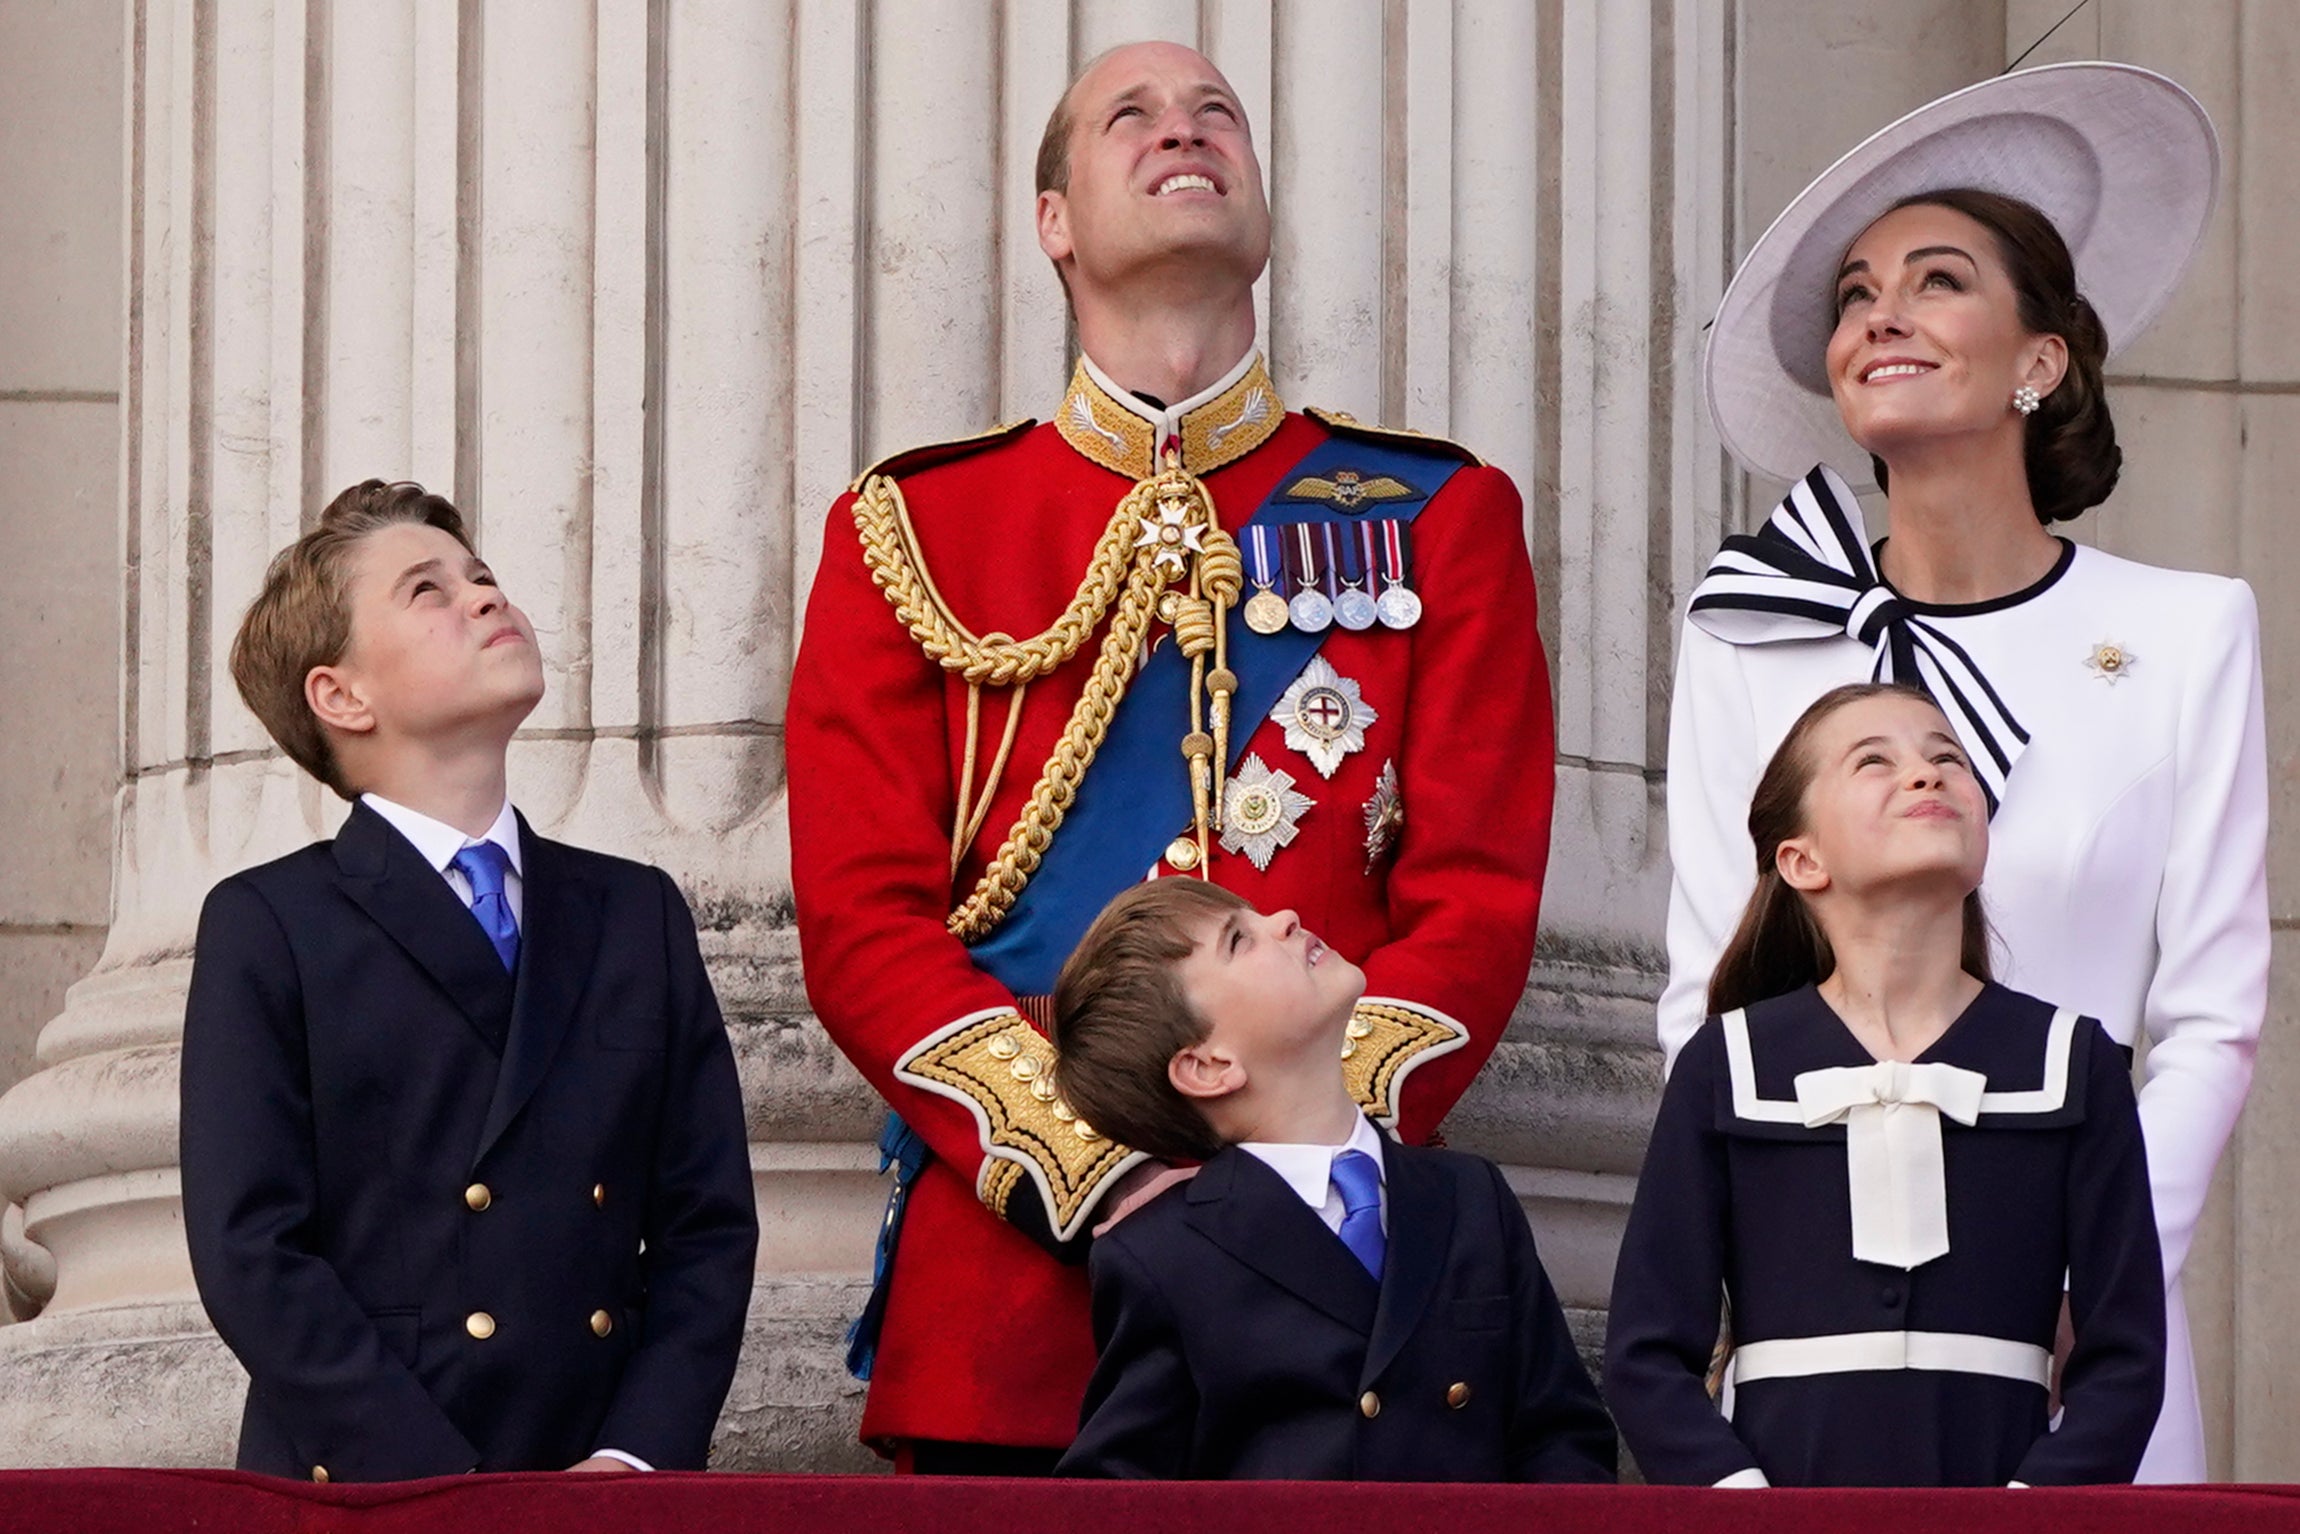 kensington palace, princess charlotte, prince william, prince george, king charles iii, kate shares touching new photo of william with george, charlotte and louis to mark father’s day